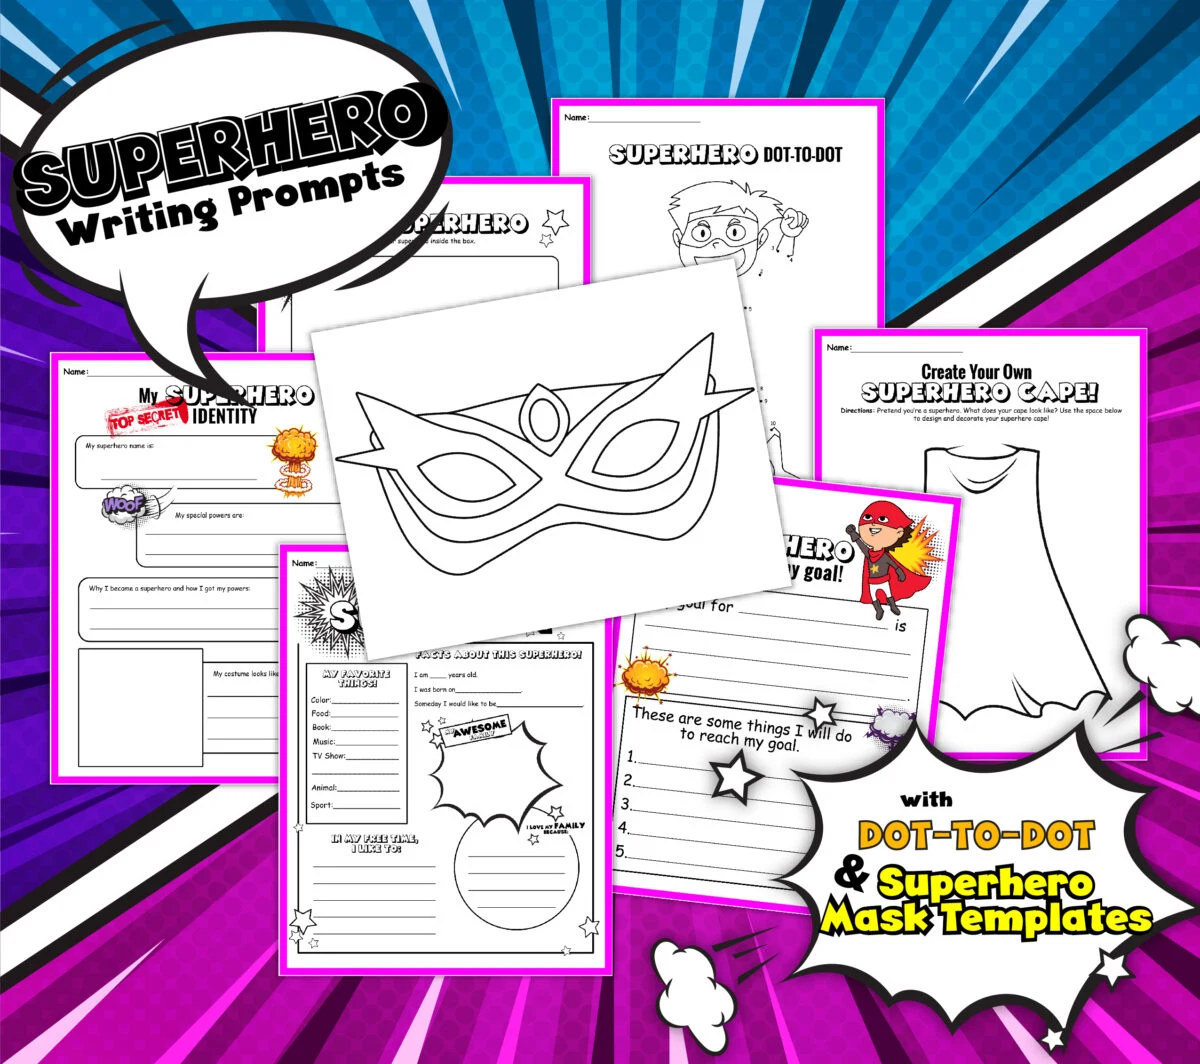 Make learning fun and engaging with our free printable superhero worksheets, they include writing prompts, dot-to-dot, and mask templates.